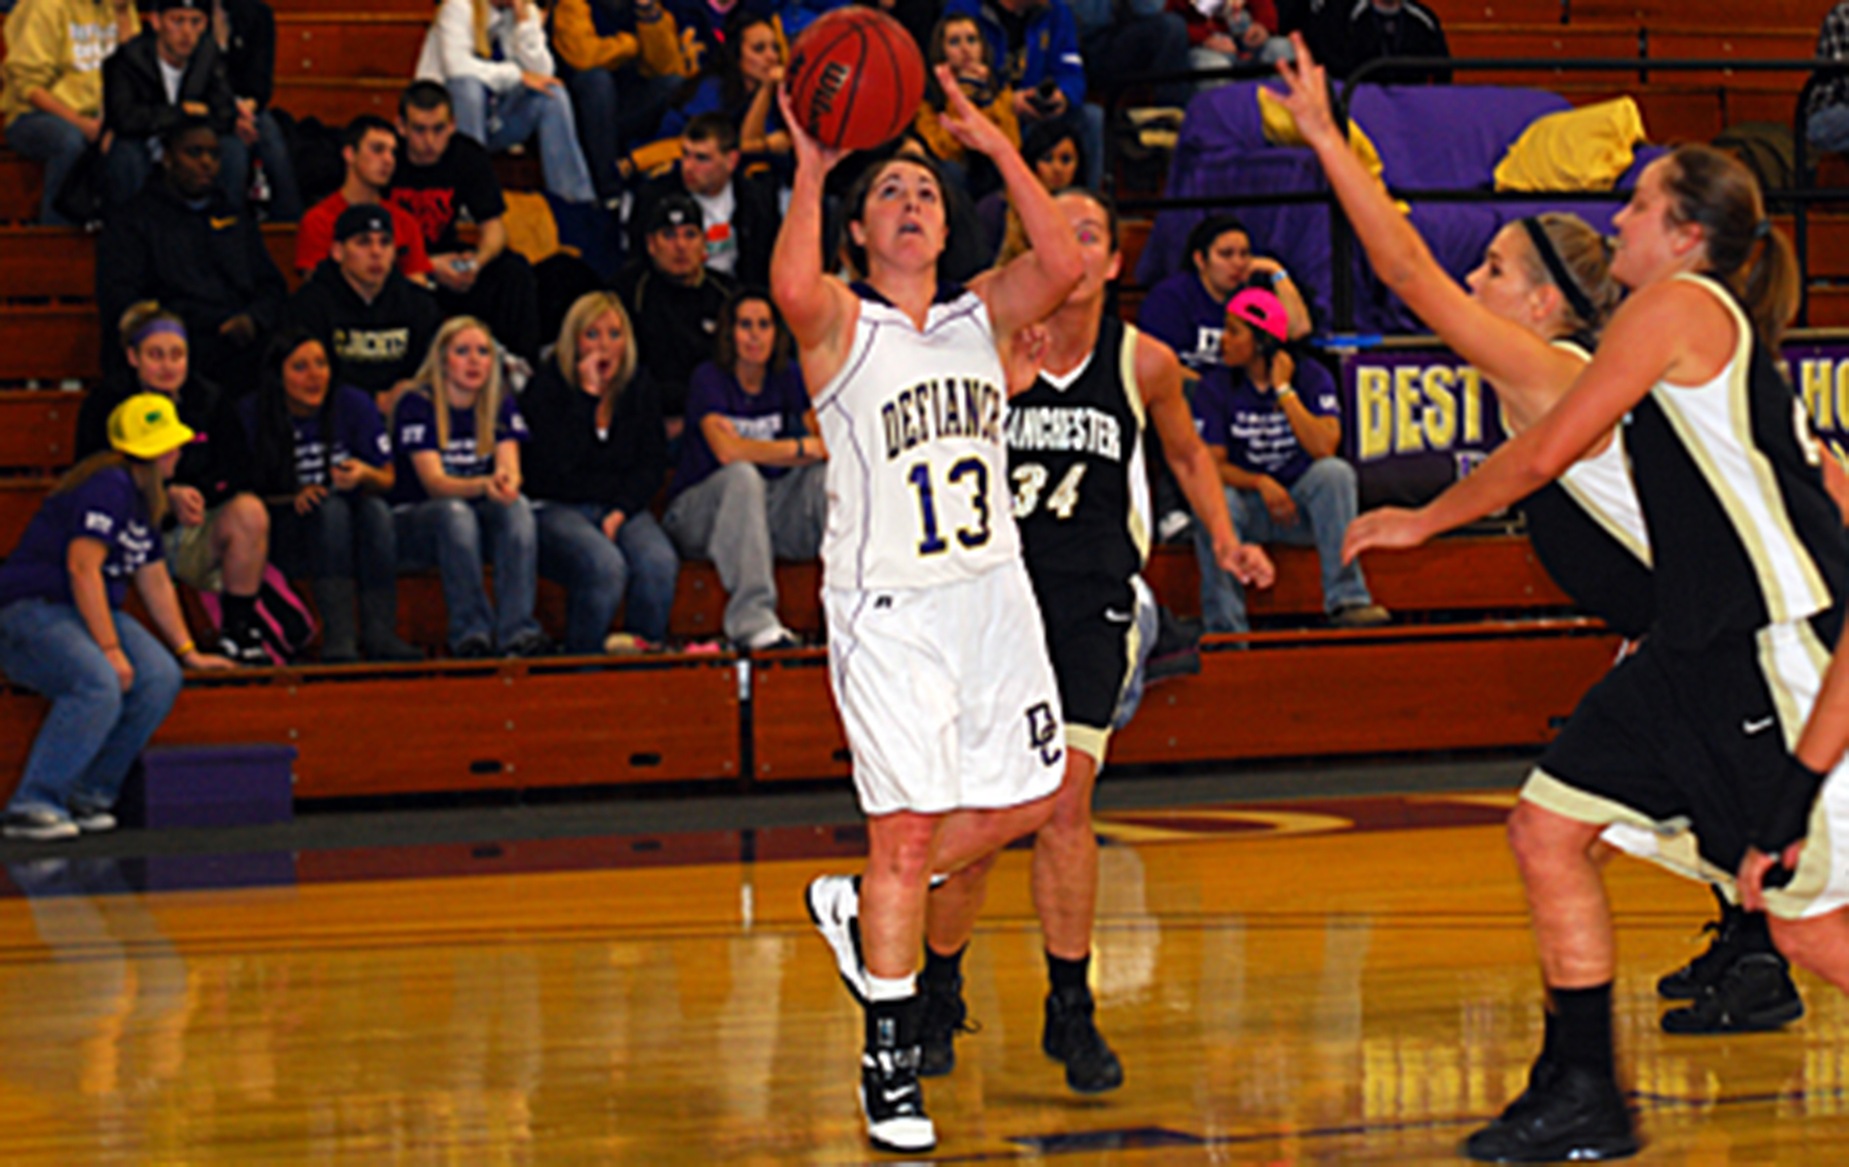 Lady Jackets' Offense Stays Hot in 85-76 Win at Manchester